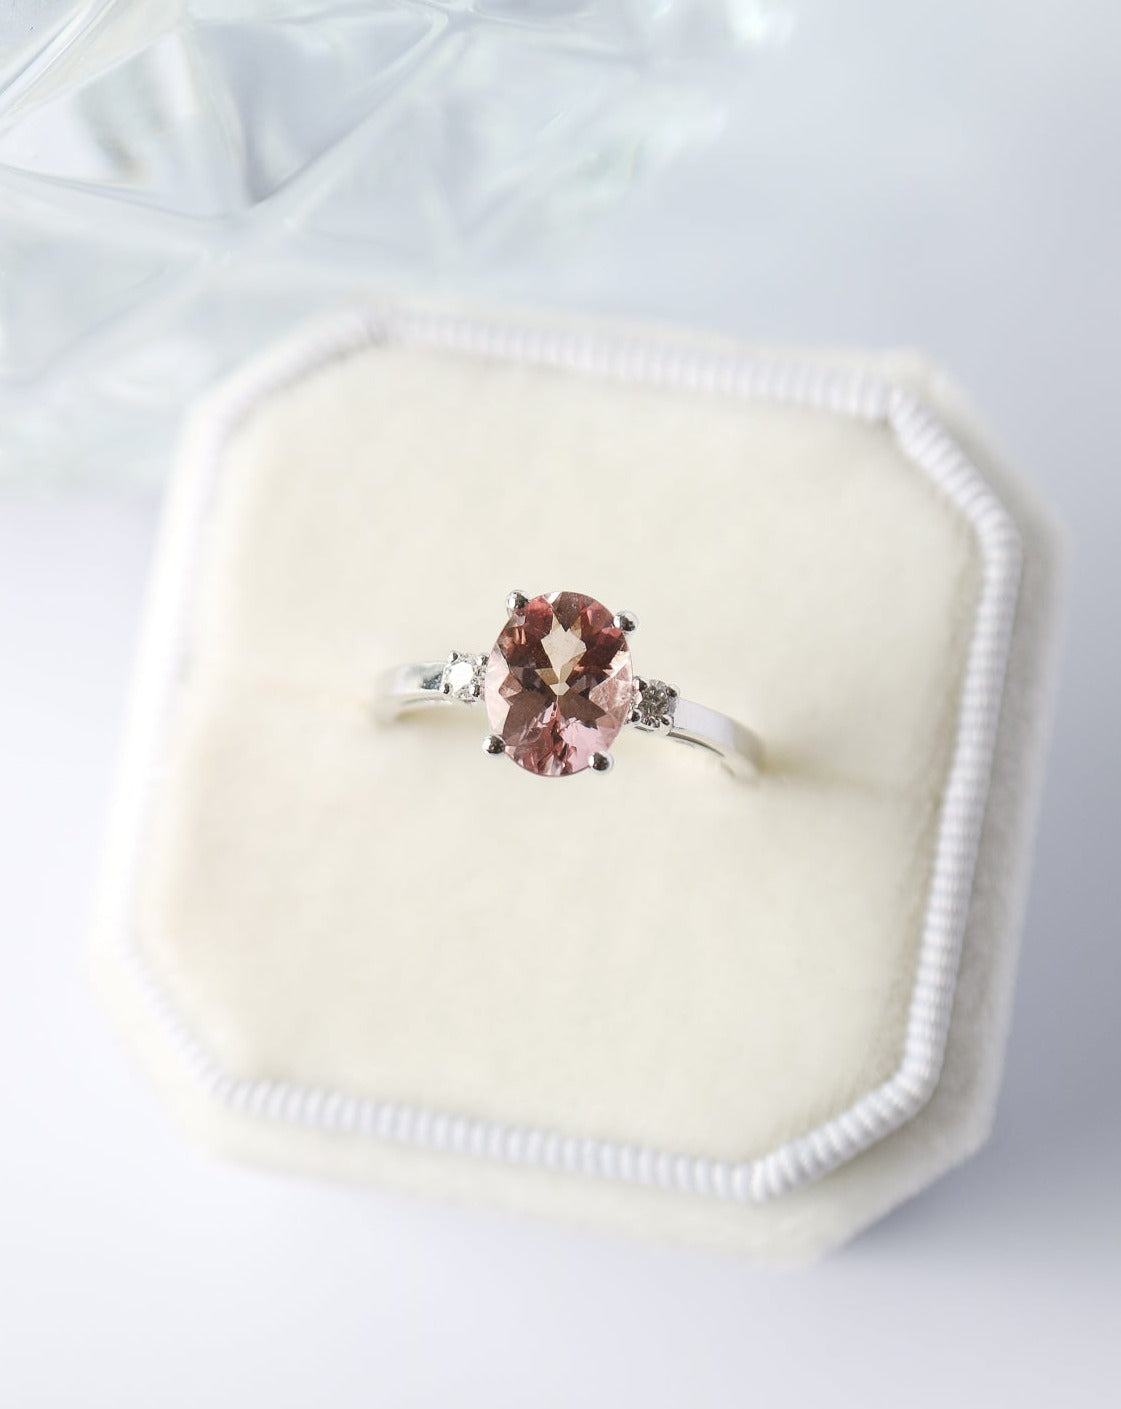 9kt white gold Oval Pink Morganite and Diamond Engagement Ring by Collective & Co Jewellery